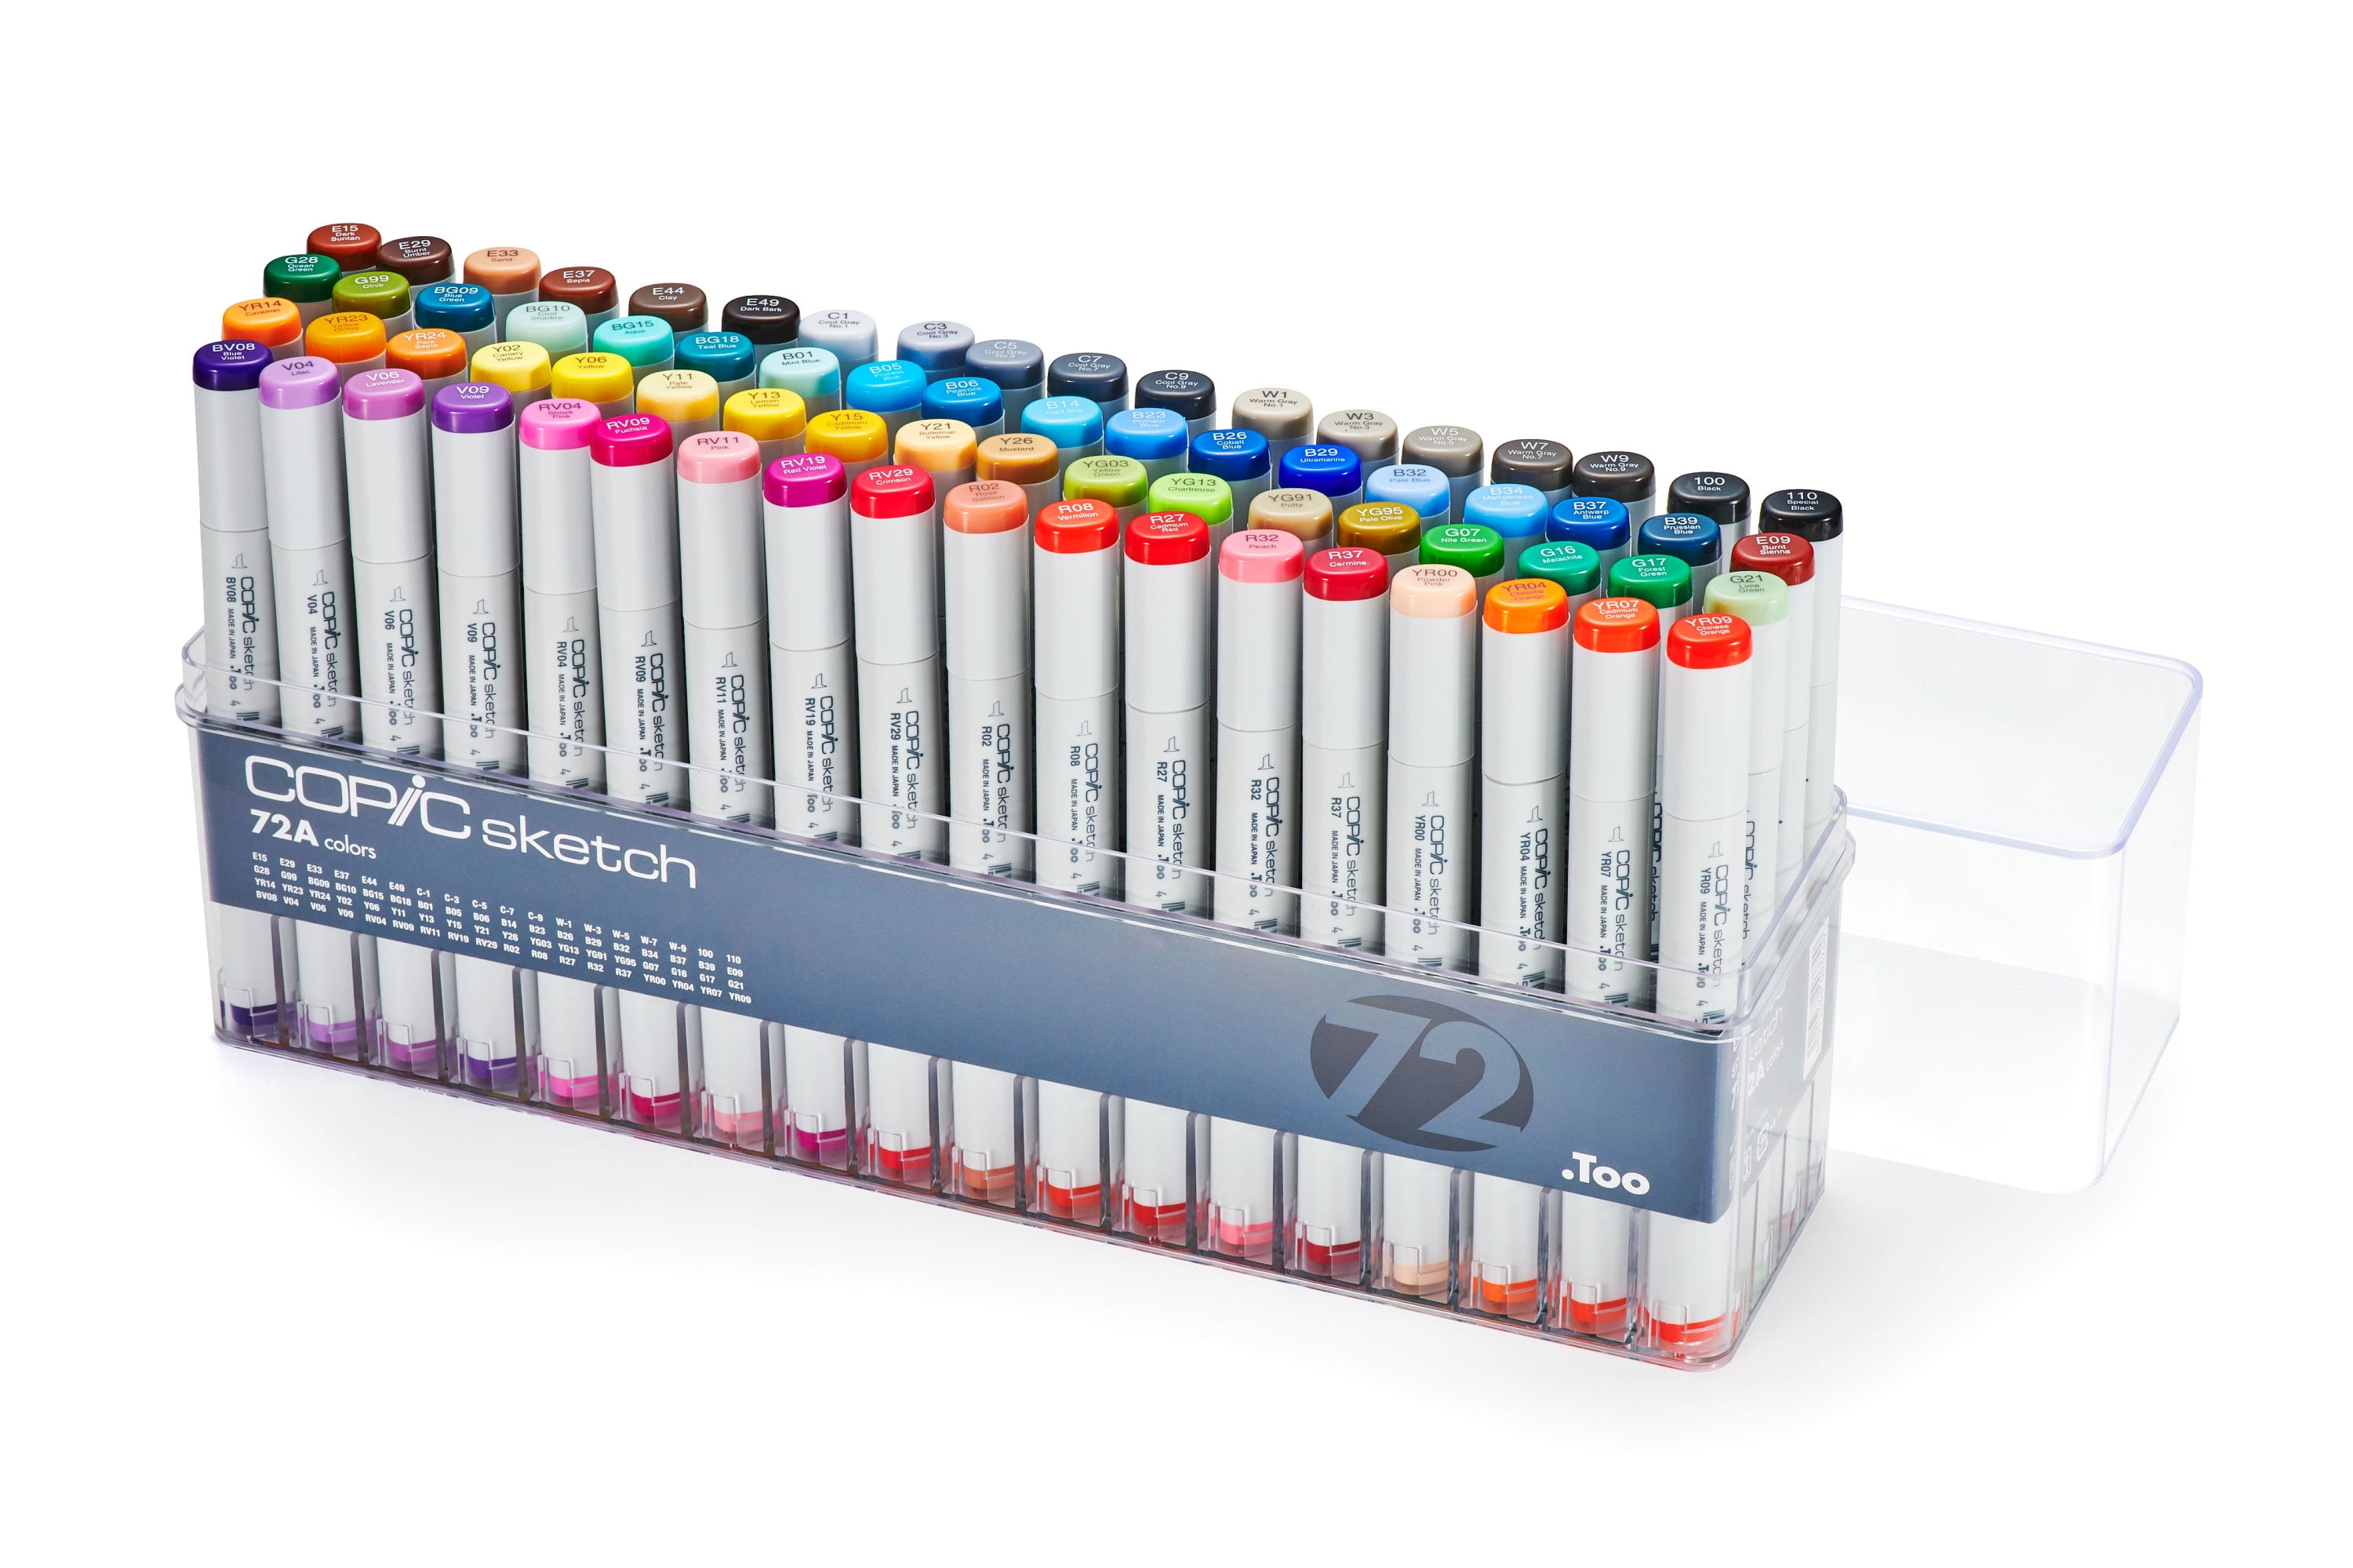 24 Copic Markers Sketch Basic Artist Set Copic Sketch Drawing Set of 24  Pens Copic Manga, Anime, Drawing Markers Set -  Denmark